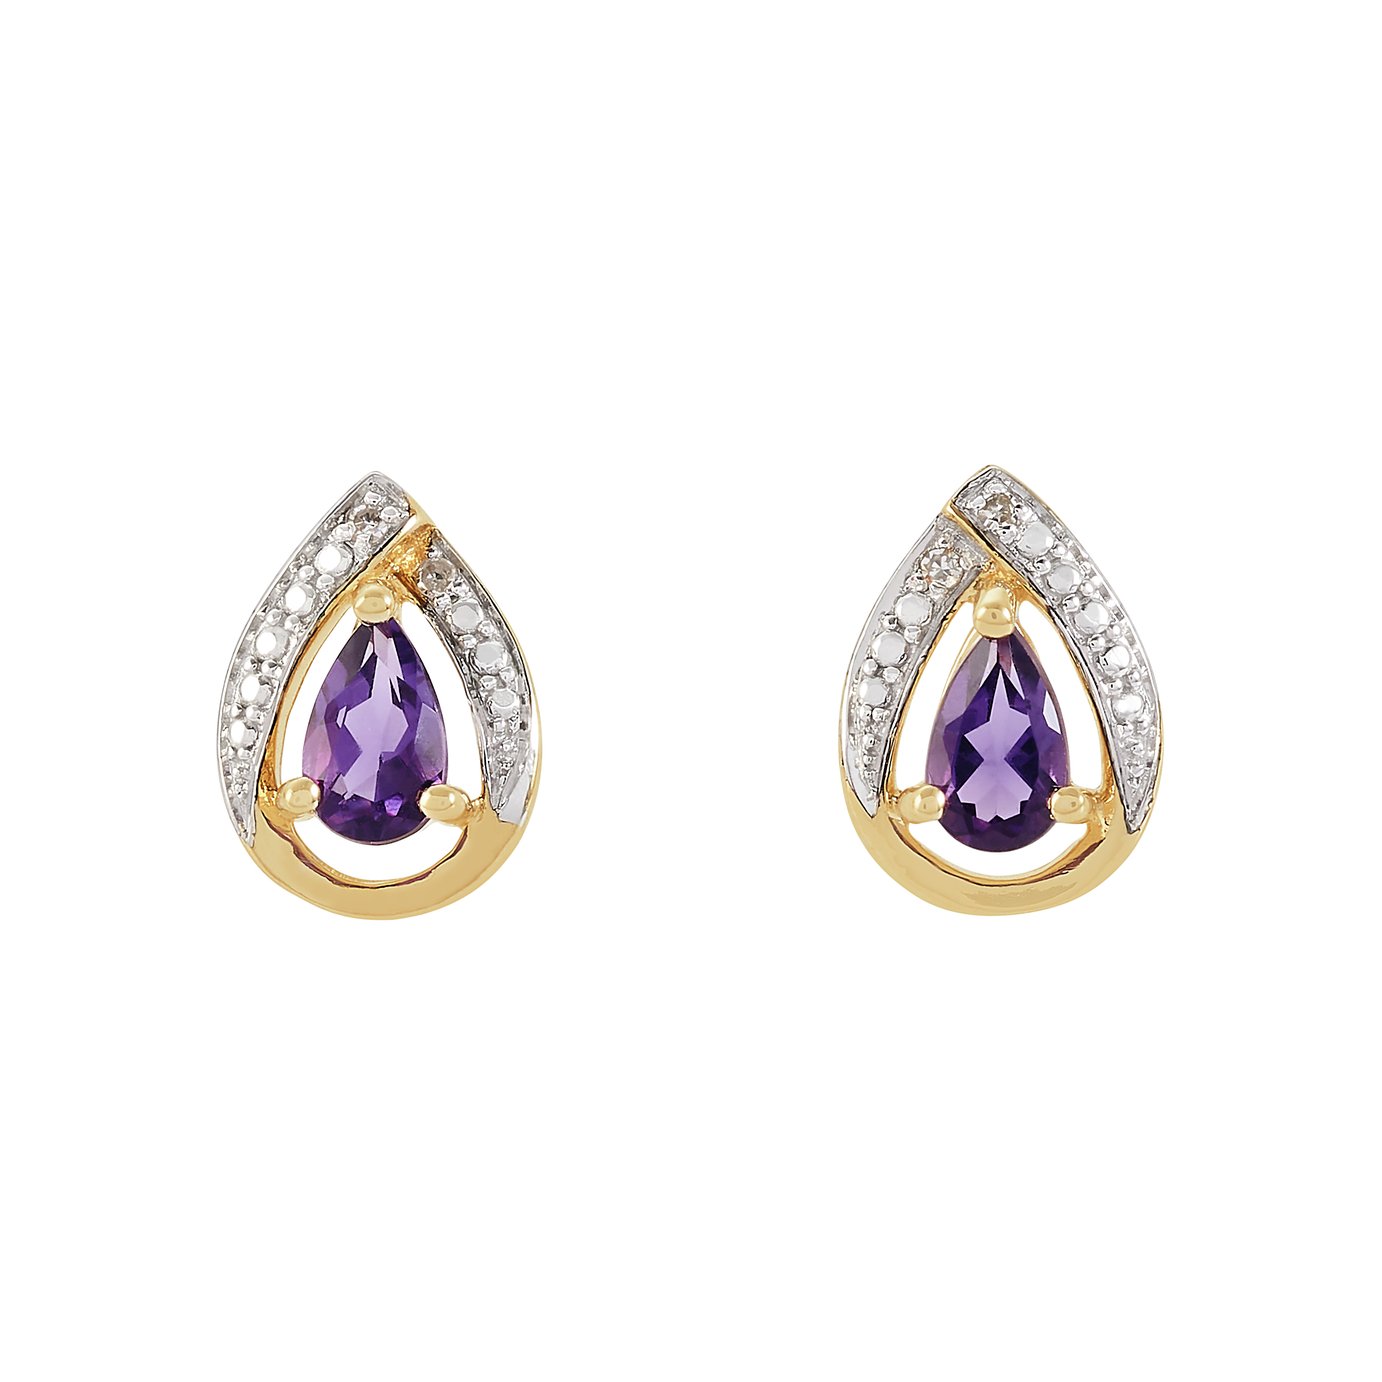 Revere 9ct Yellow Gold Amethyst Stone Stud Earrings Review